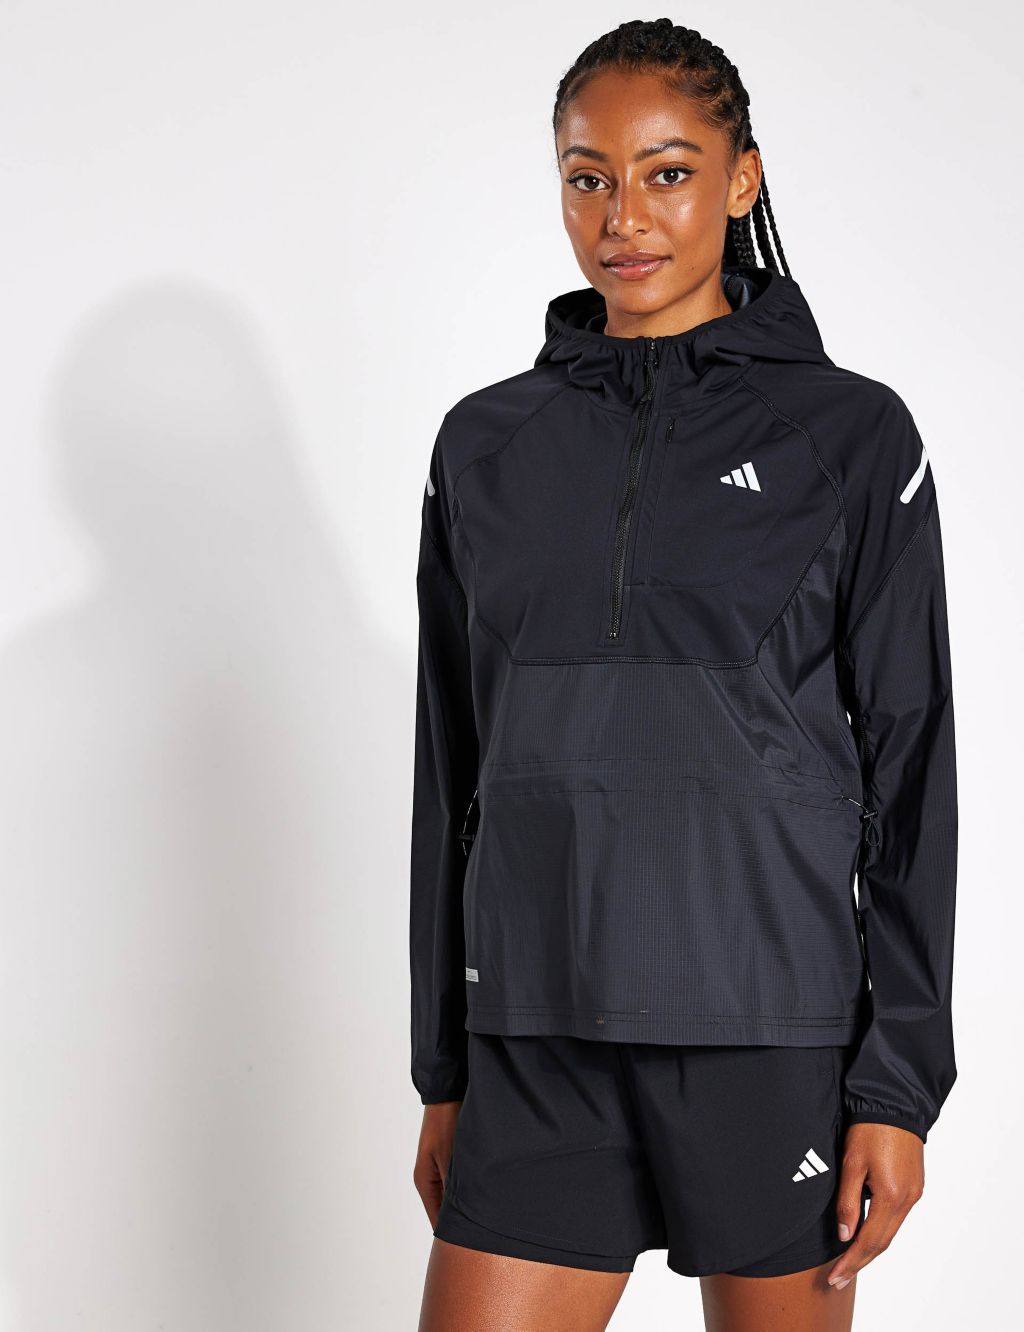  Women's Athletic Jackets - Women's Athletic Jackets / Women's  Activewear: Clothing, Shoes & Jewelry